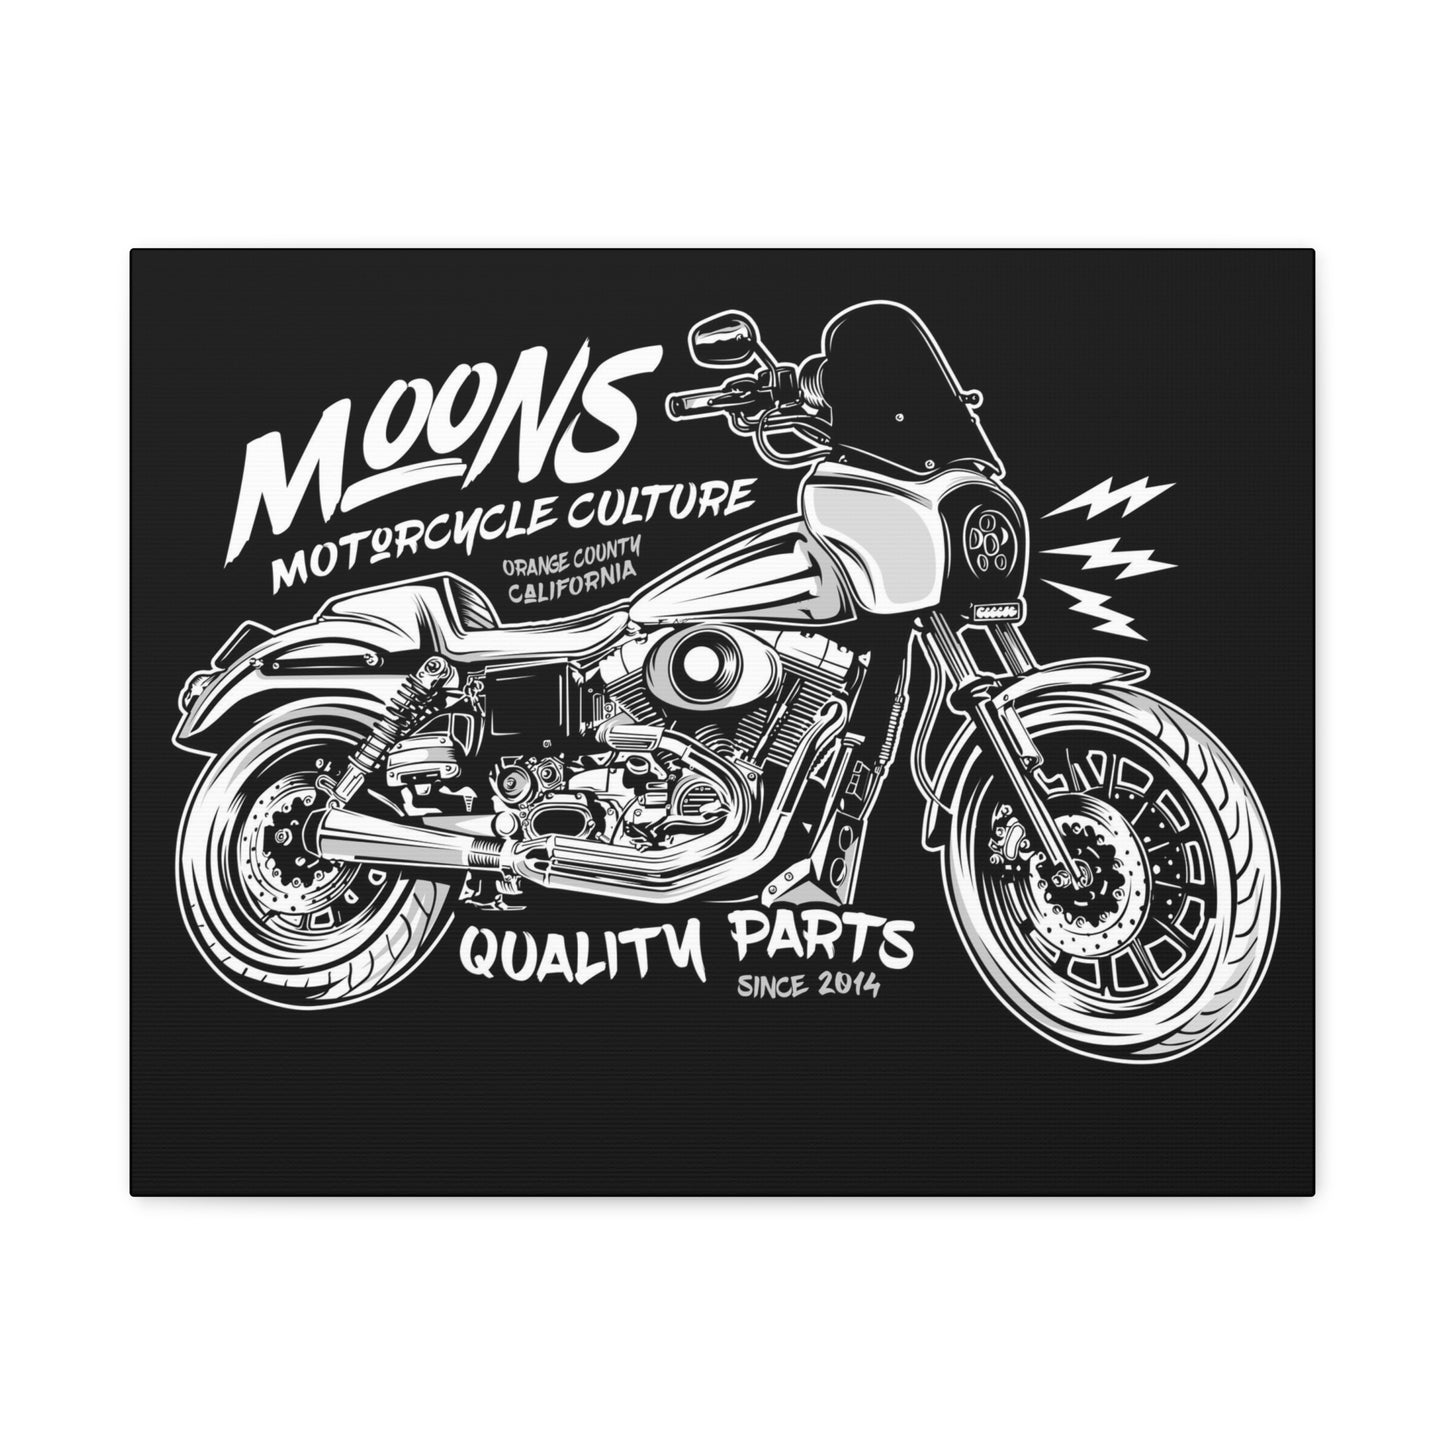 2001 Dyna FXDXT - Canvas Gallery Wrap